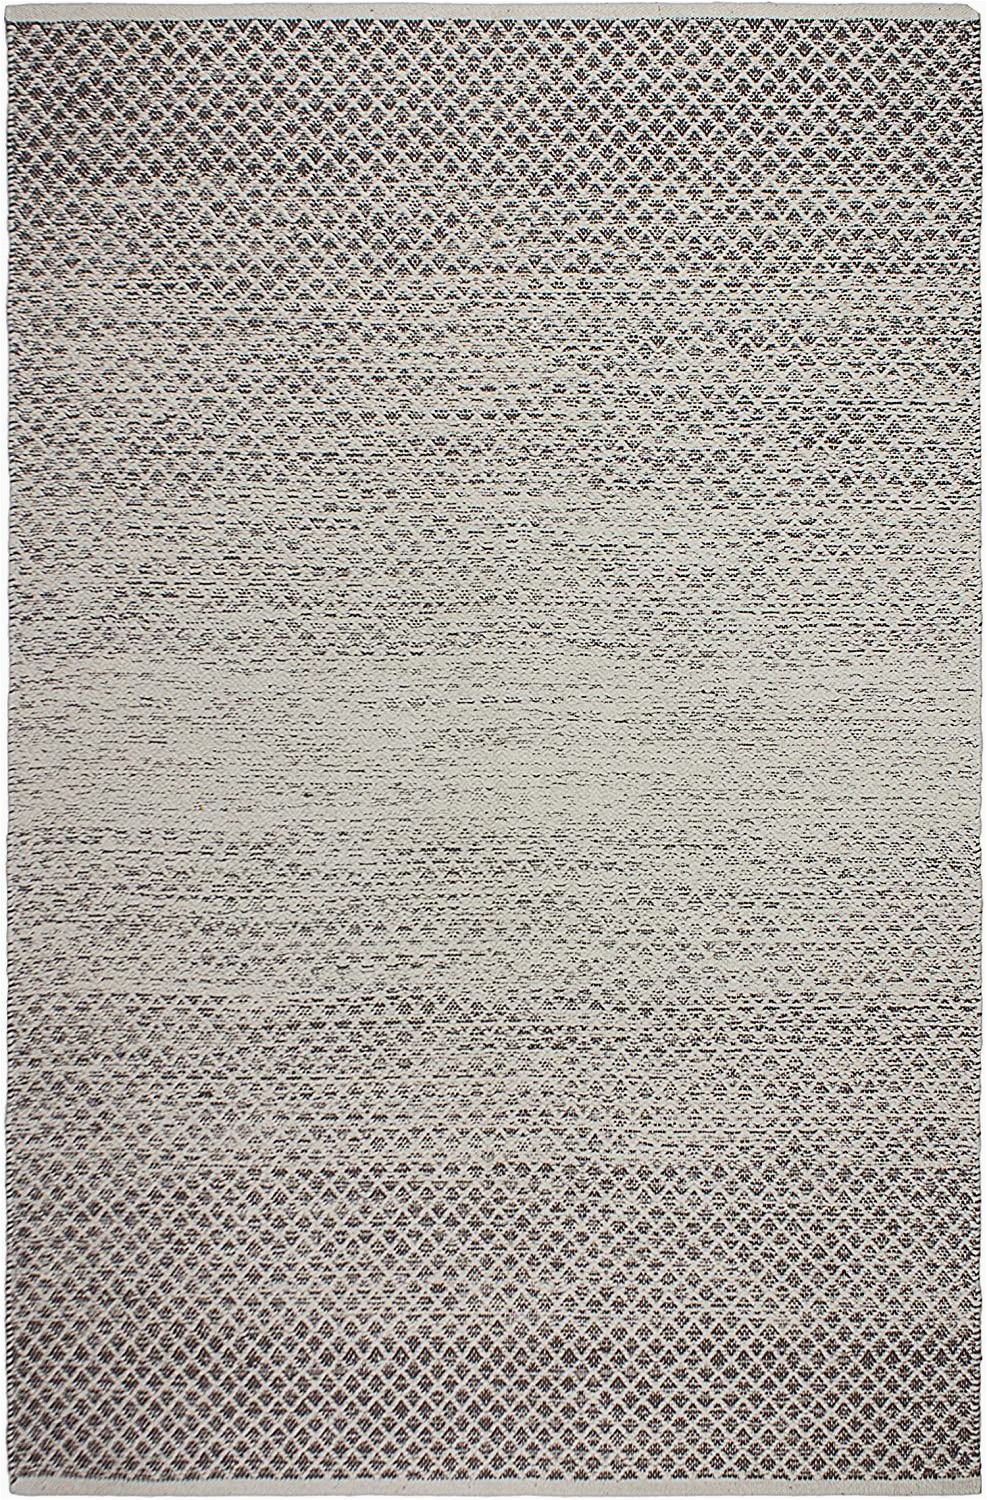 Machine Washable area Rugs 5×7 Fab Habitat Reversible Cotton area Rugs Rugs for Living Room Bathroom Rug Kitchen Rug Machine Washable Aurora Gray